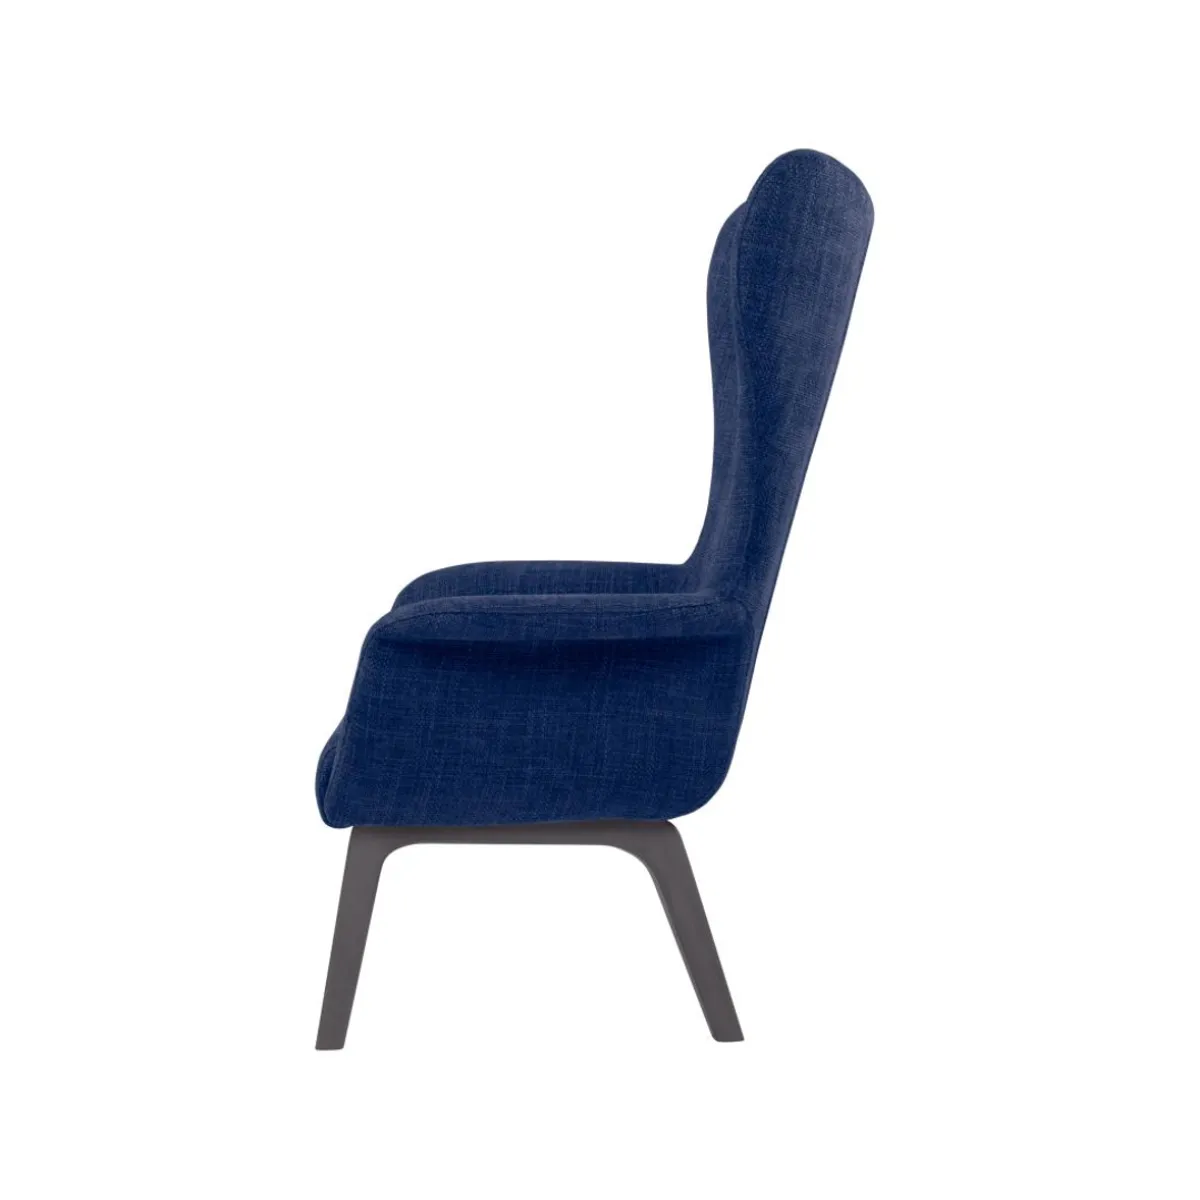 Avery wing back chair3